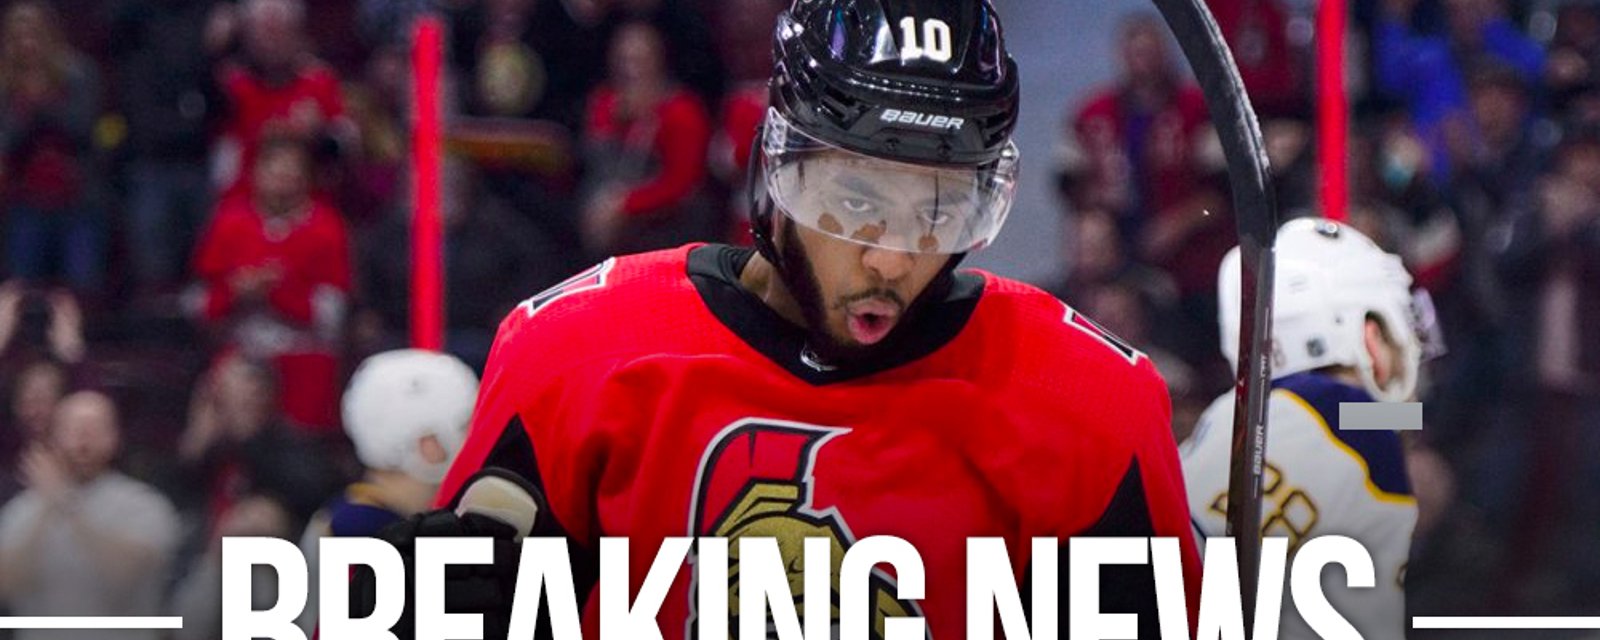 Duclair breaks off talks with Sens, will head to free agency